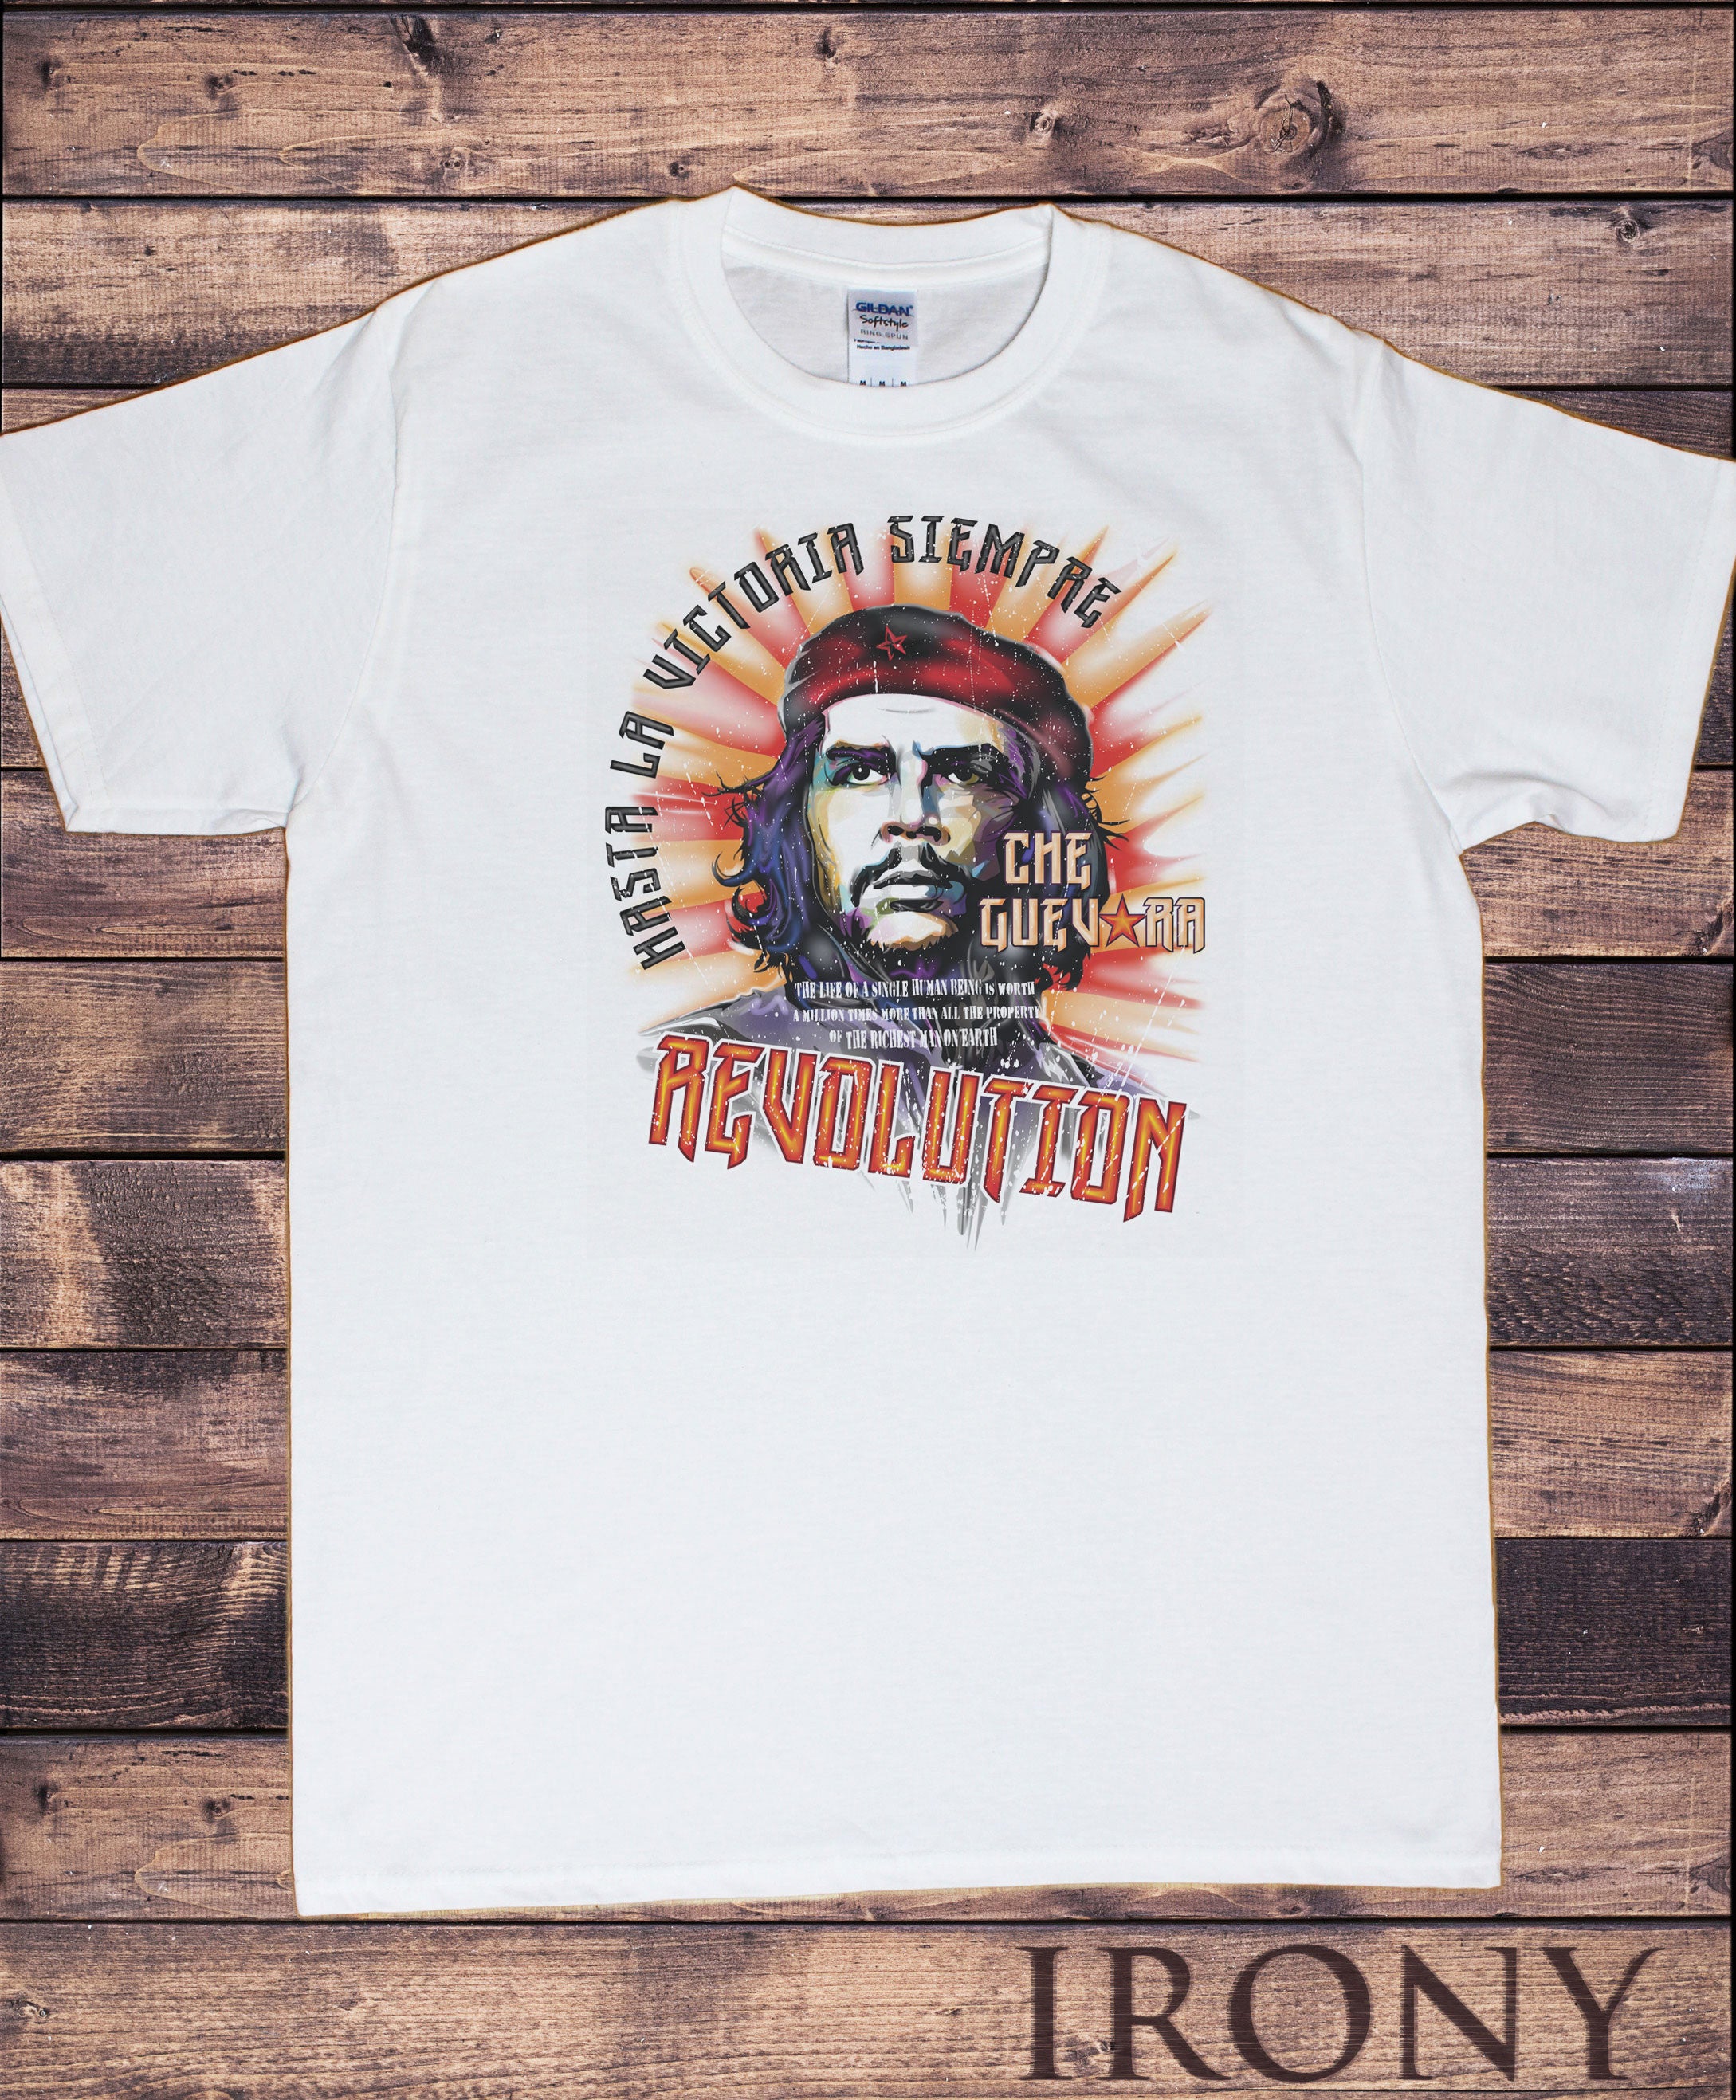 How the Che Guevara t-shirt became a global phenomenon